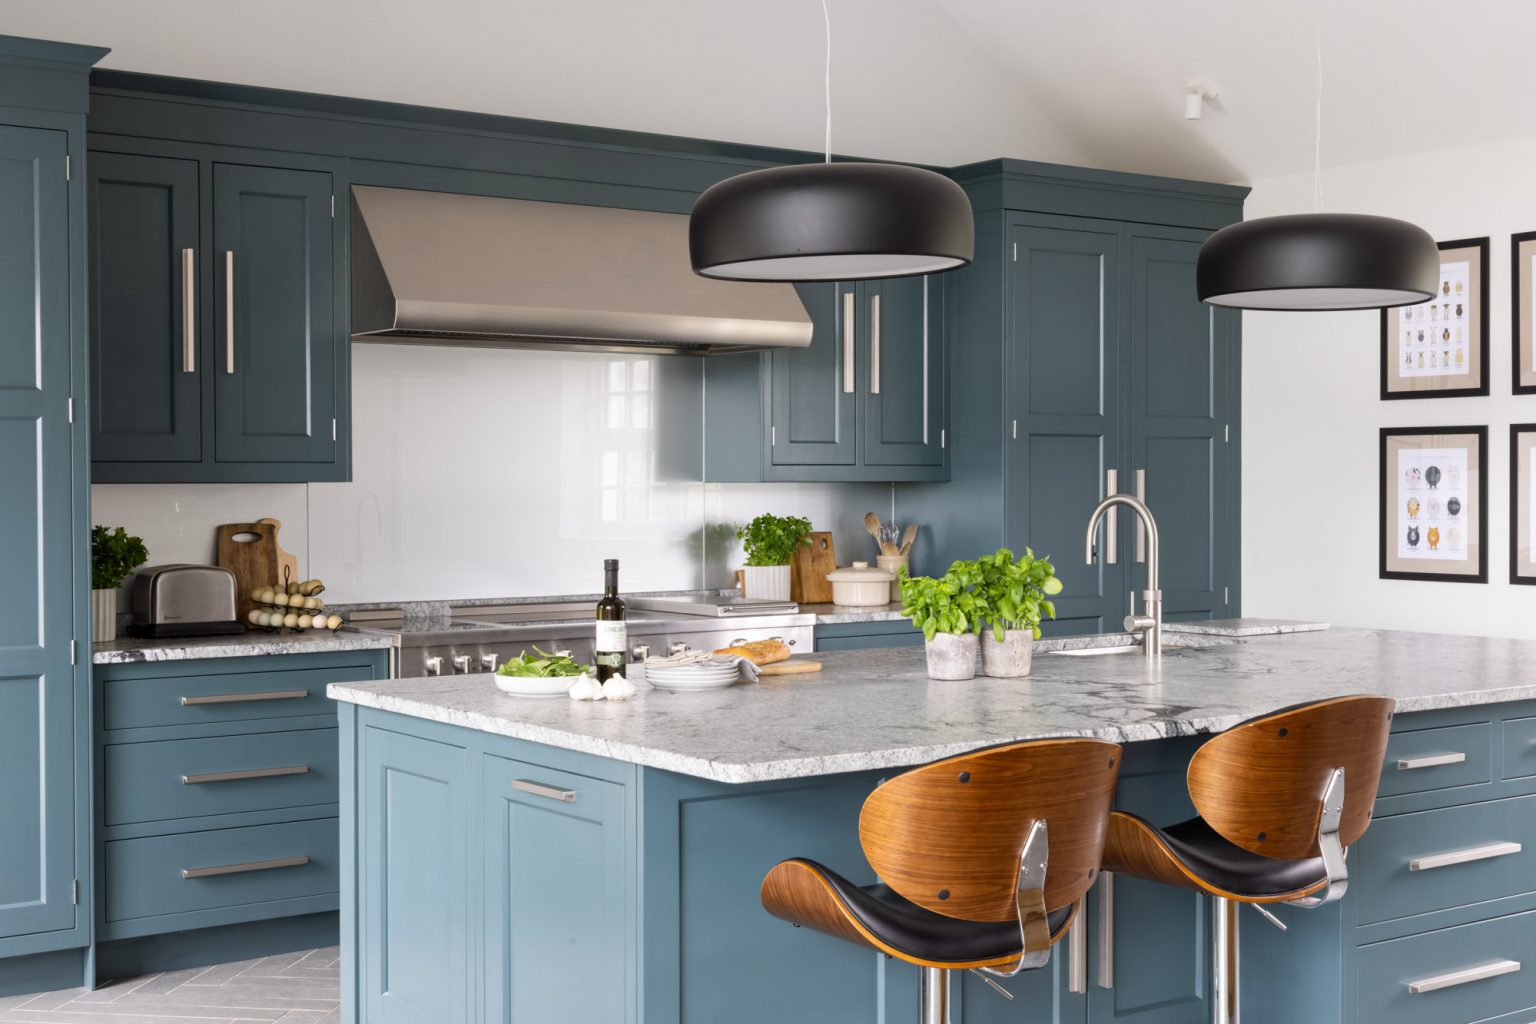 cheshire fitted kitchen makers, bespoke kitchen designers in hope valley cheshire